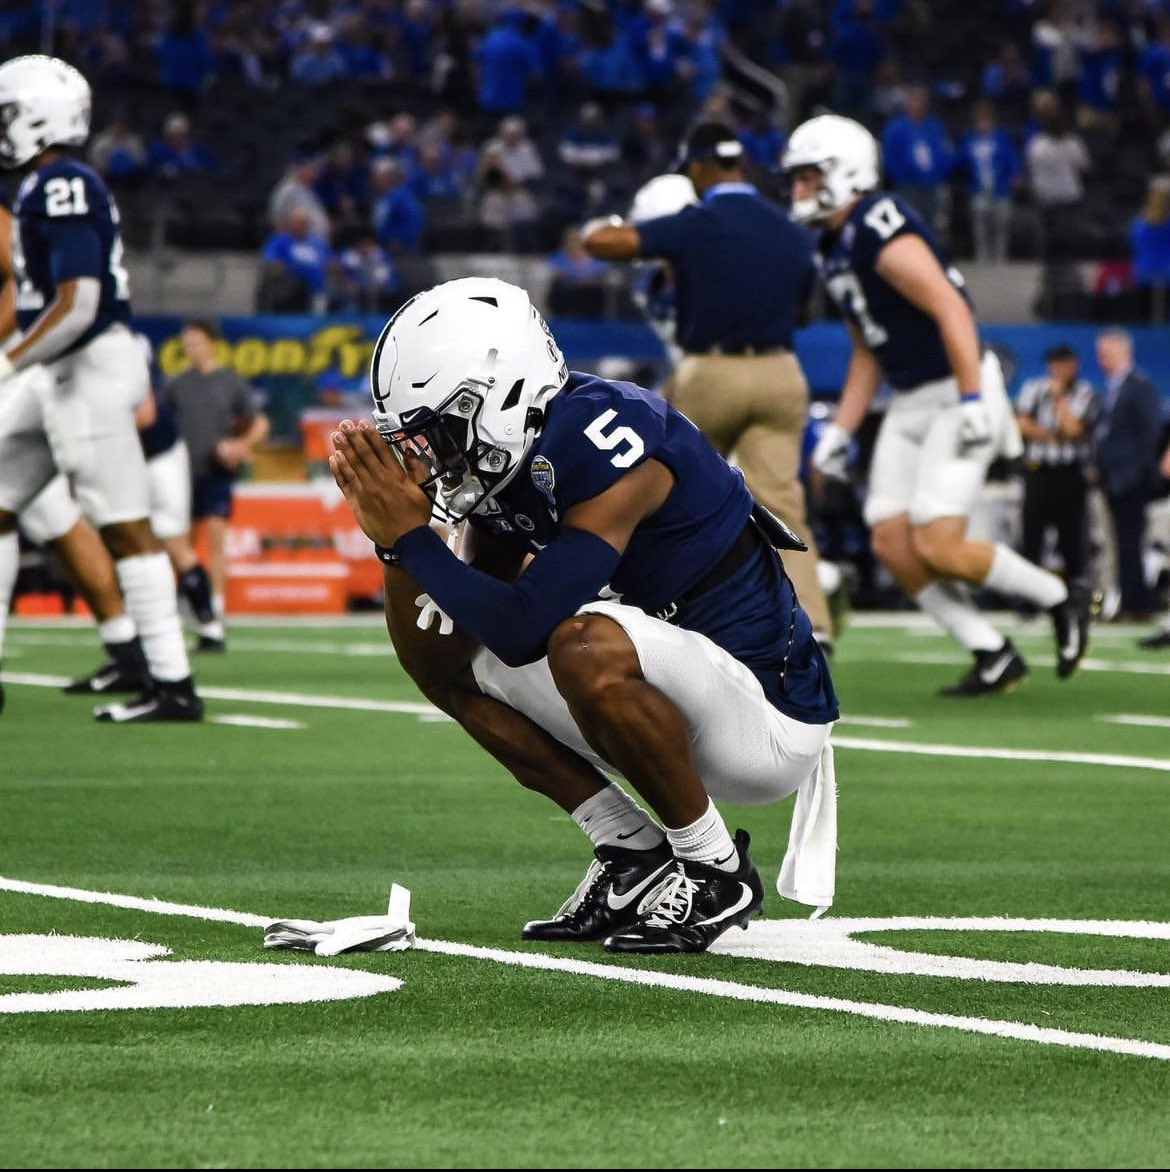 #AGTG I am blessed to receive a offer from The University of Penn State⚪️🔵 #Weare @coachjfranklin @coachmhagans @shadrich80 @CalvinLowry @SachseStangs @DSwan7